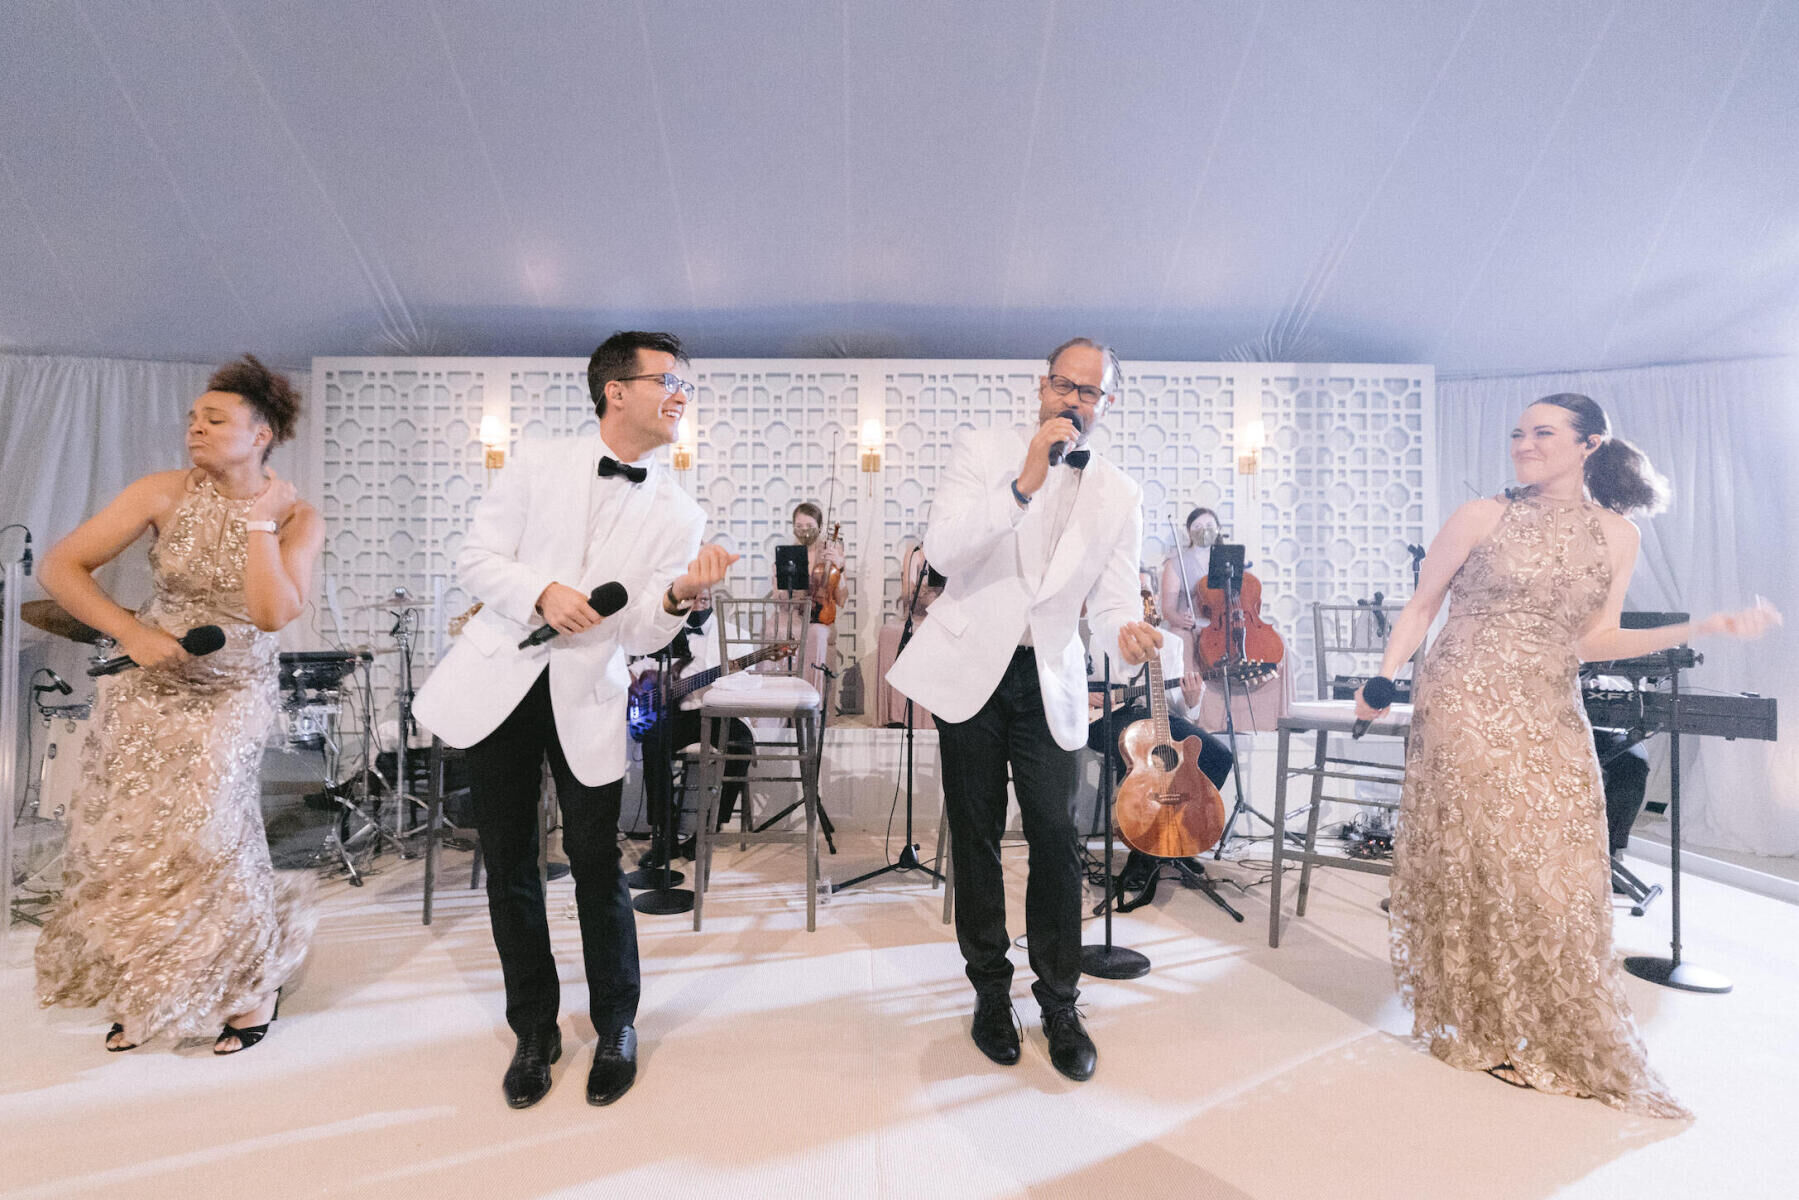 A band performs in a tent during an at-home wedding.